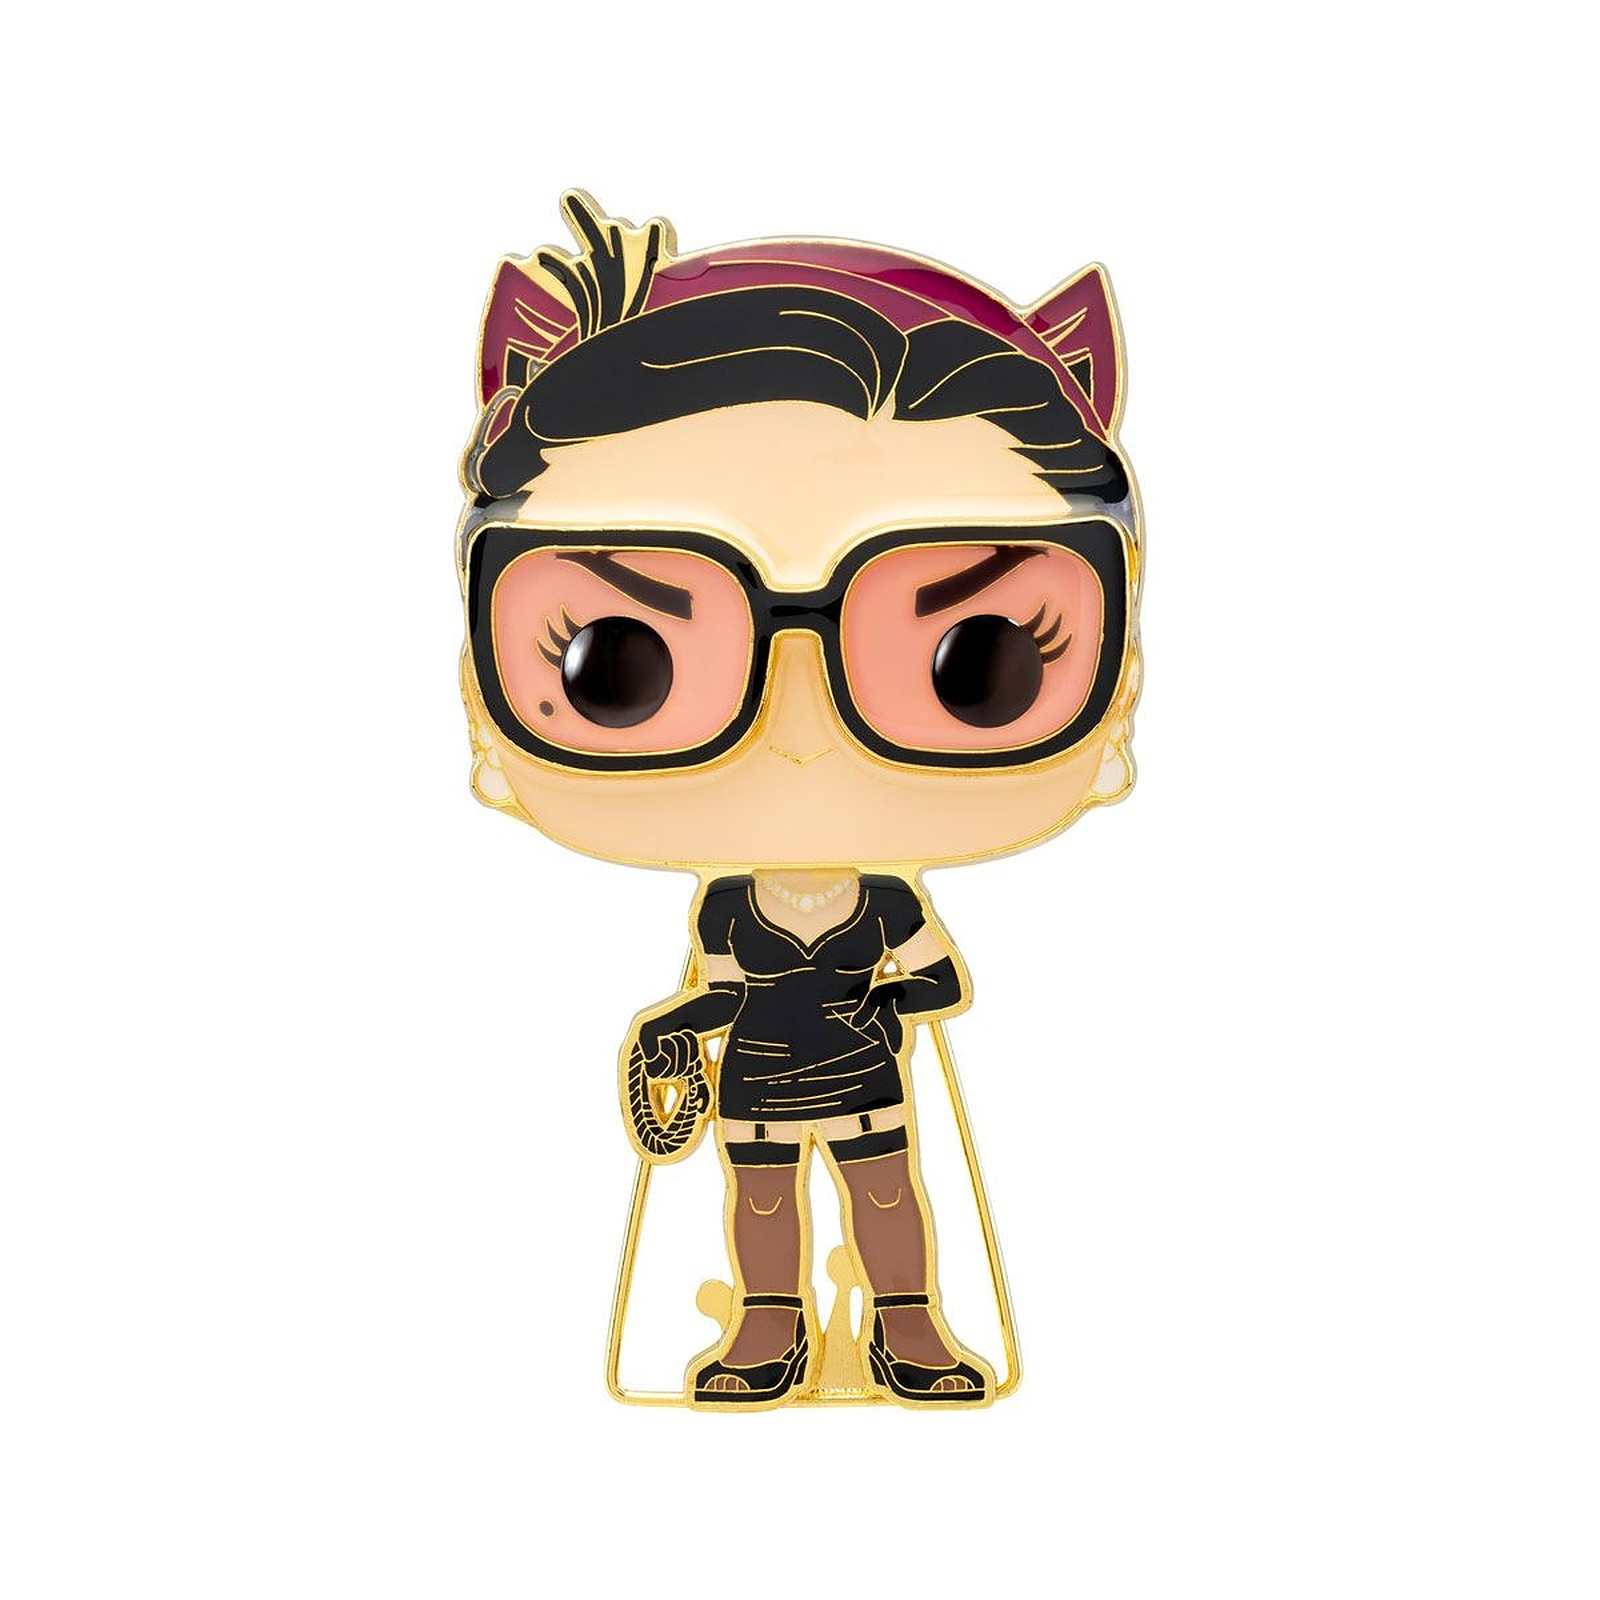 DC Comics - Figurine POP! Pin pin's emaille Catwoman 10 cm - Figurines Funko